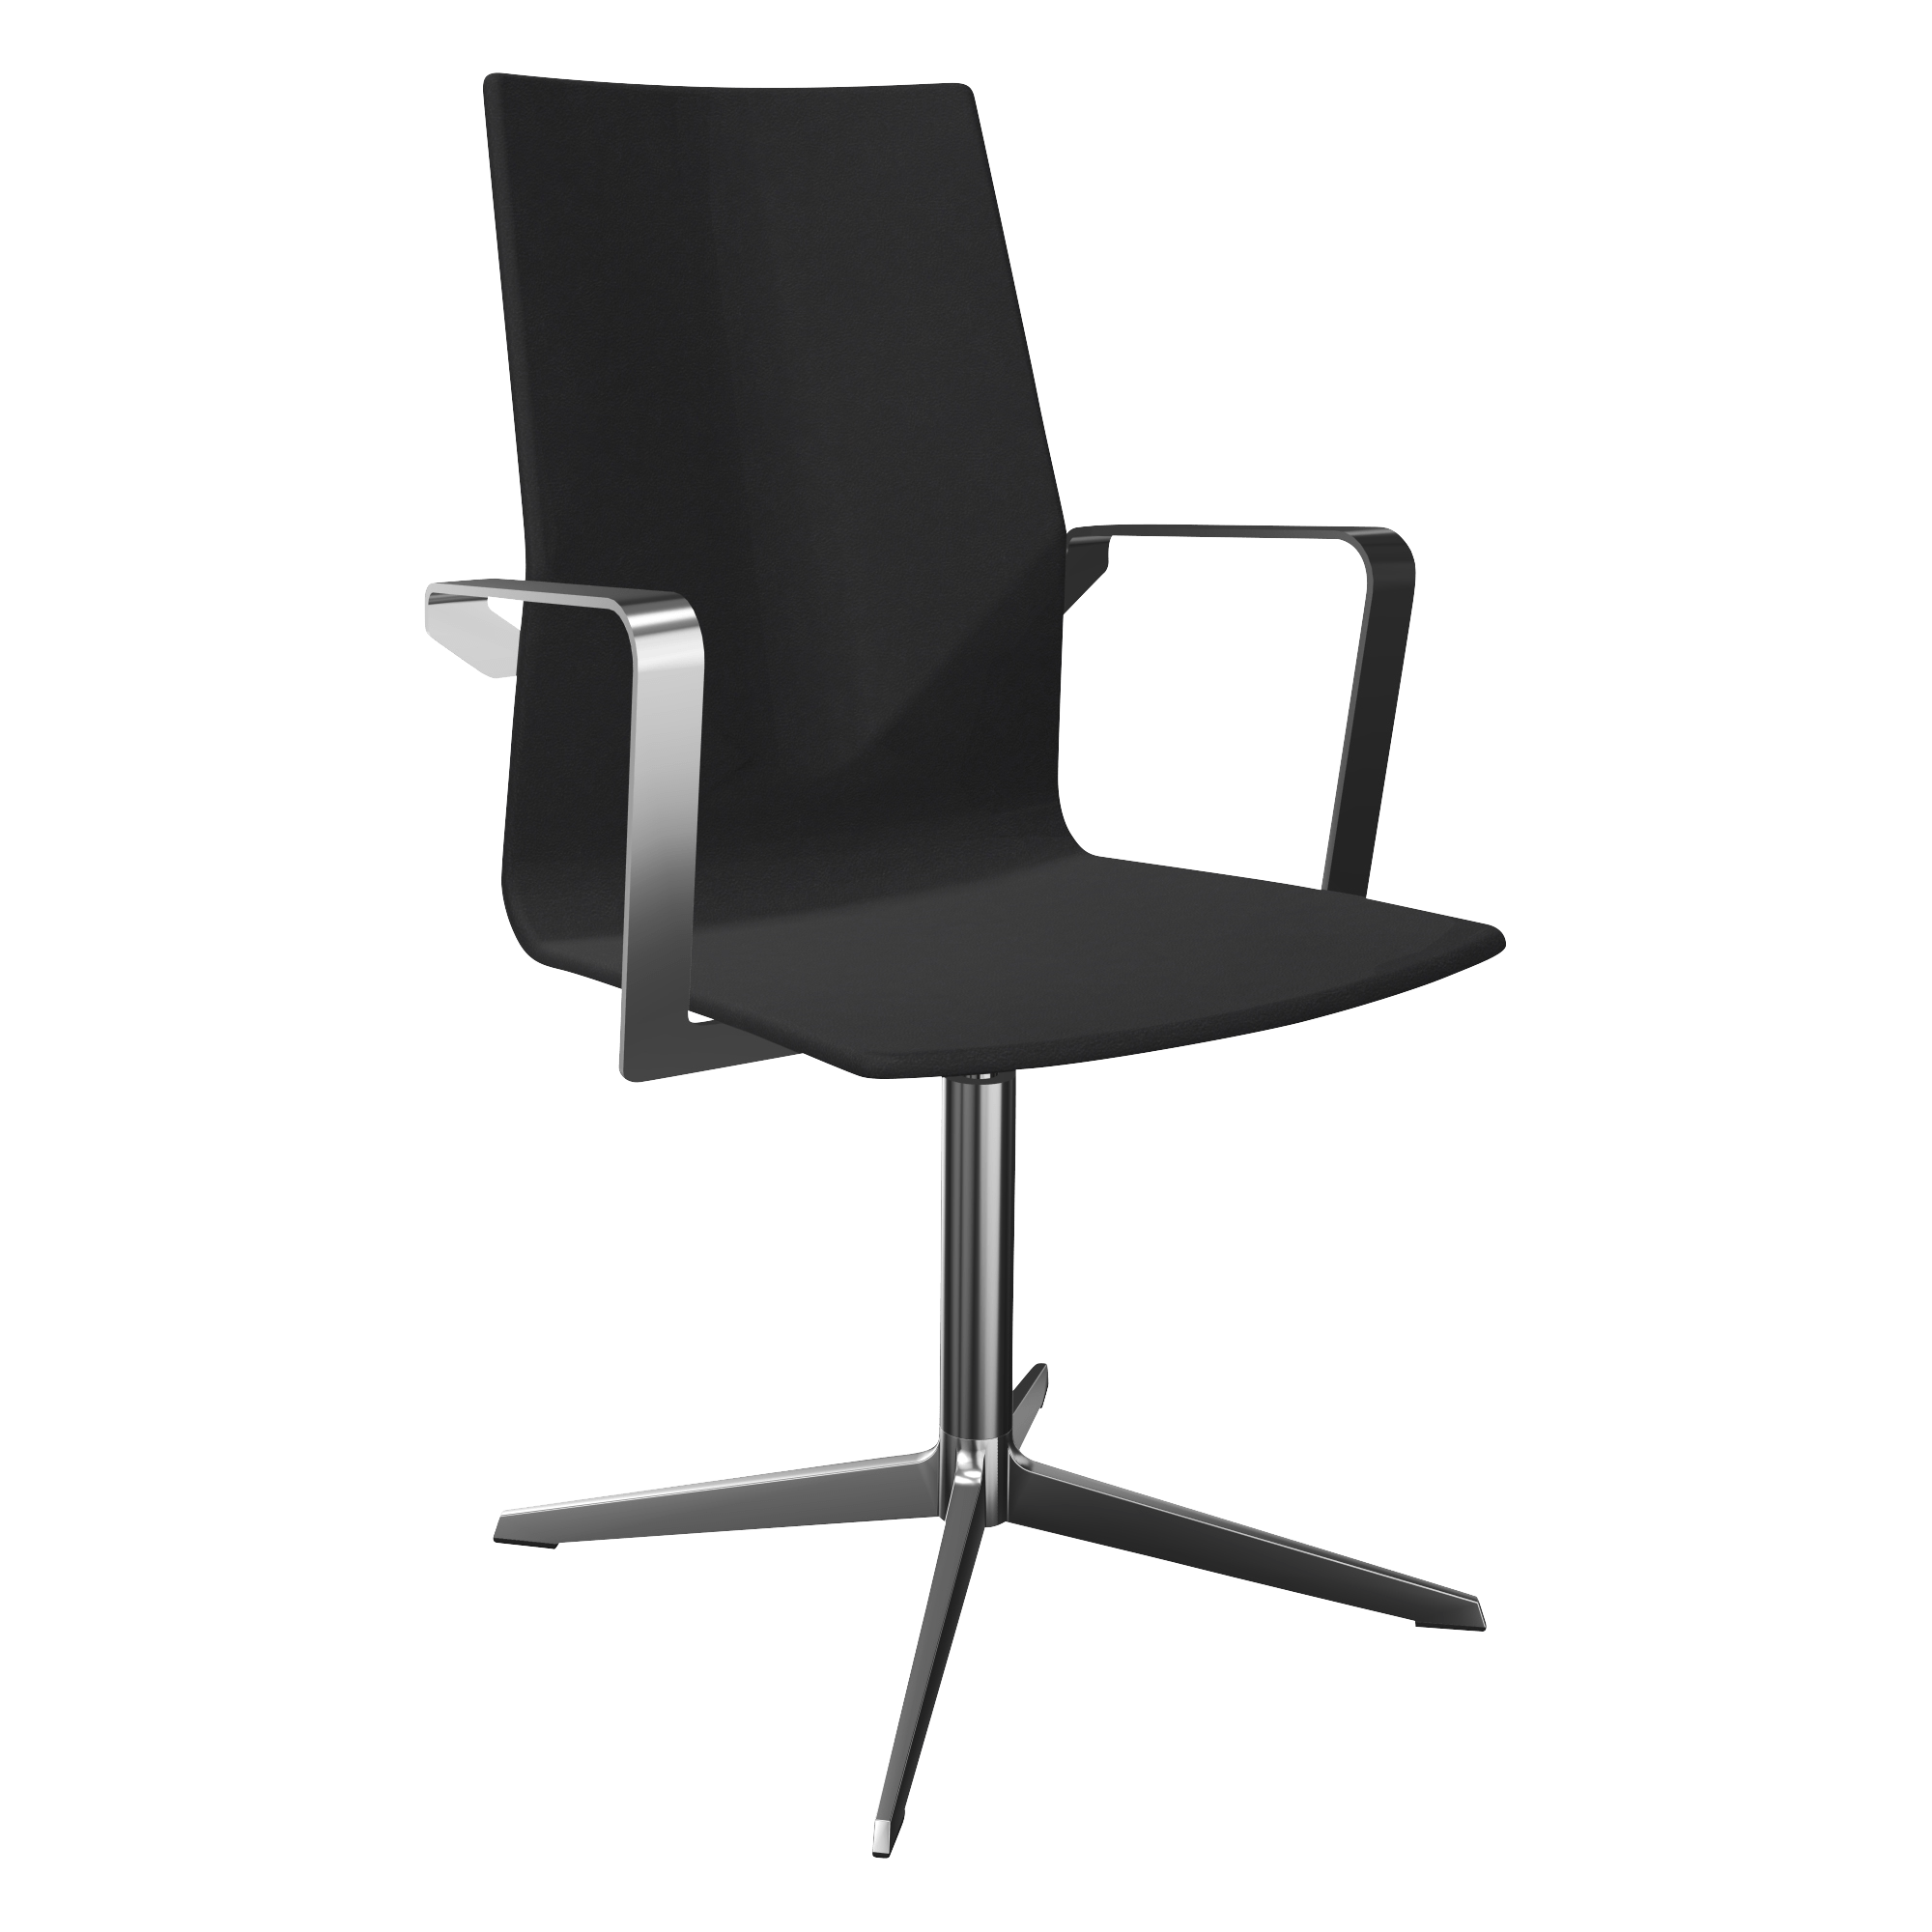 A black office chair with arm rests with a pedestal leg